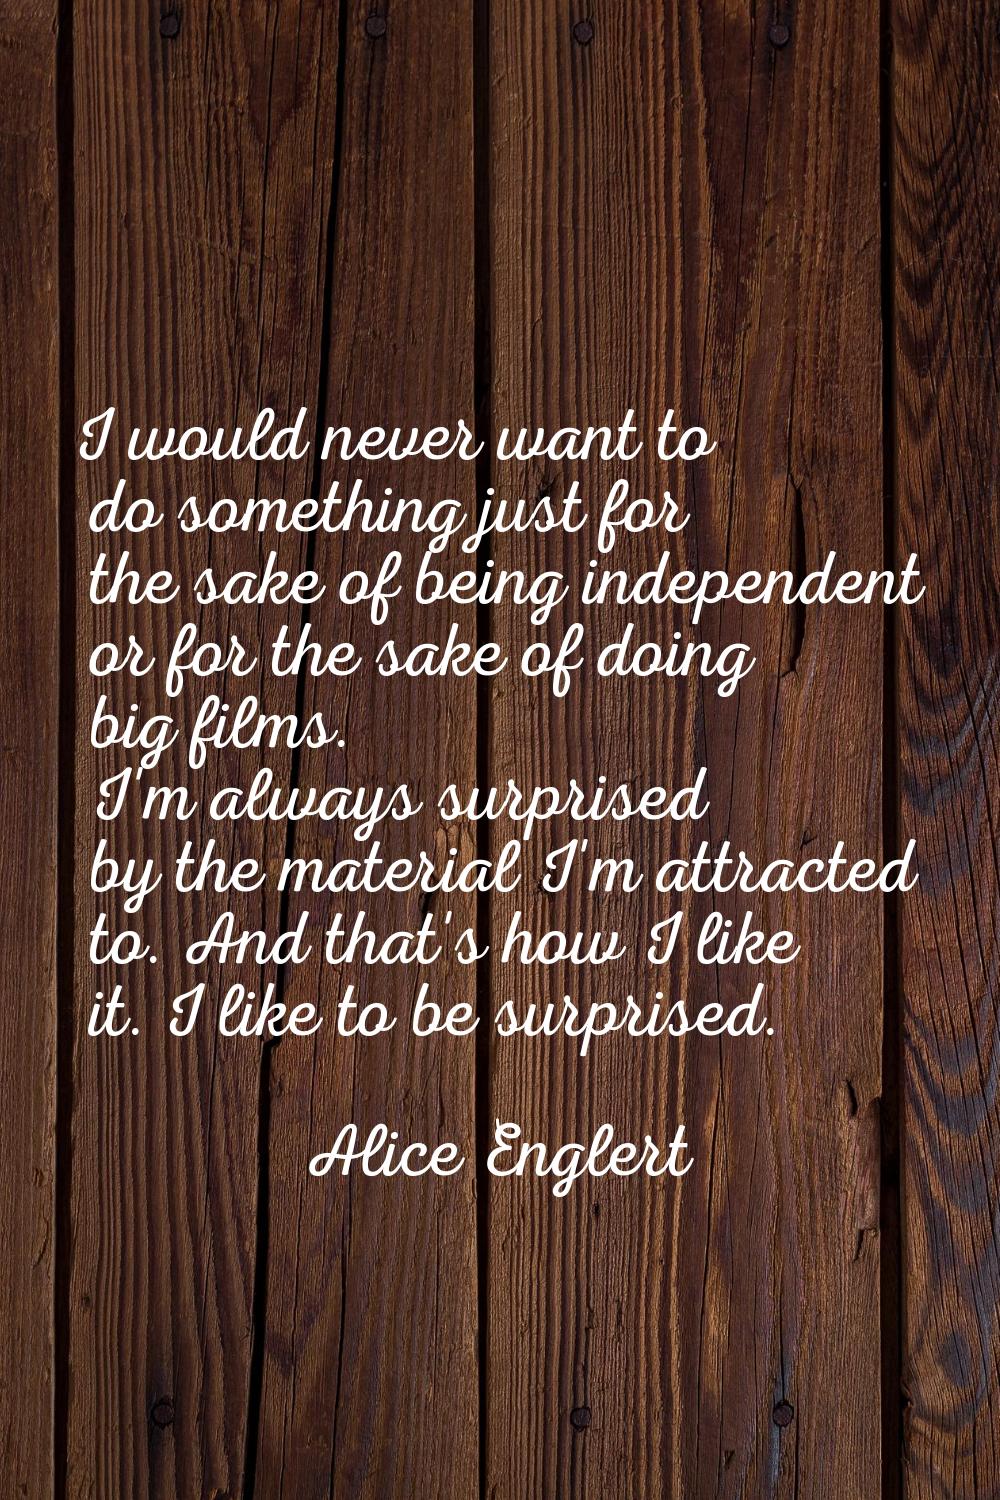 I would never want to do something just for the sake of being independent or for the sake of doing 